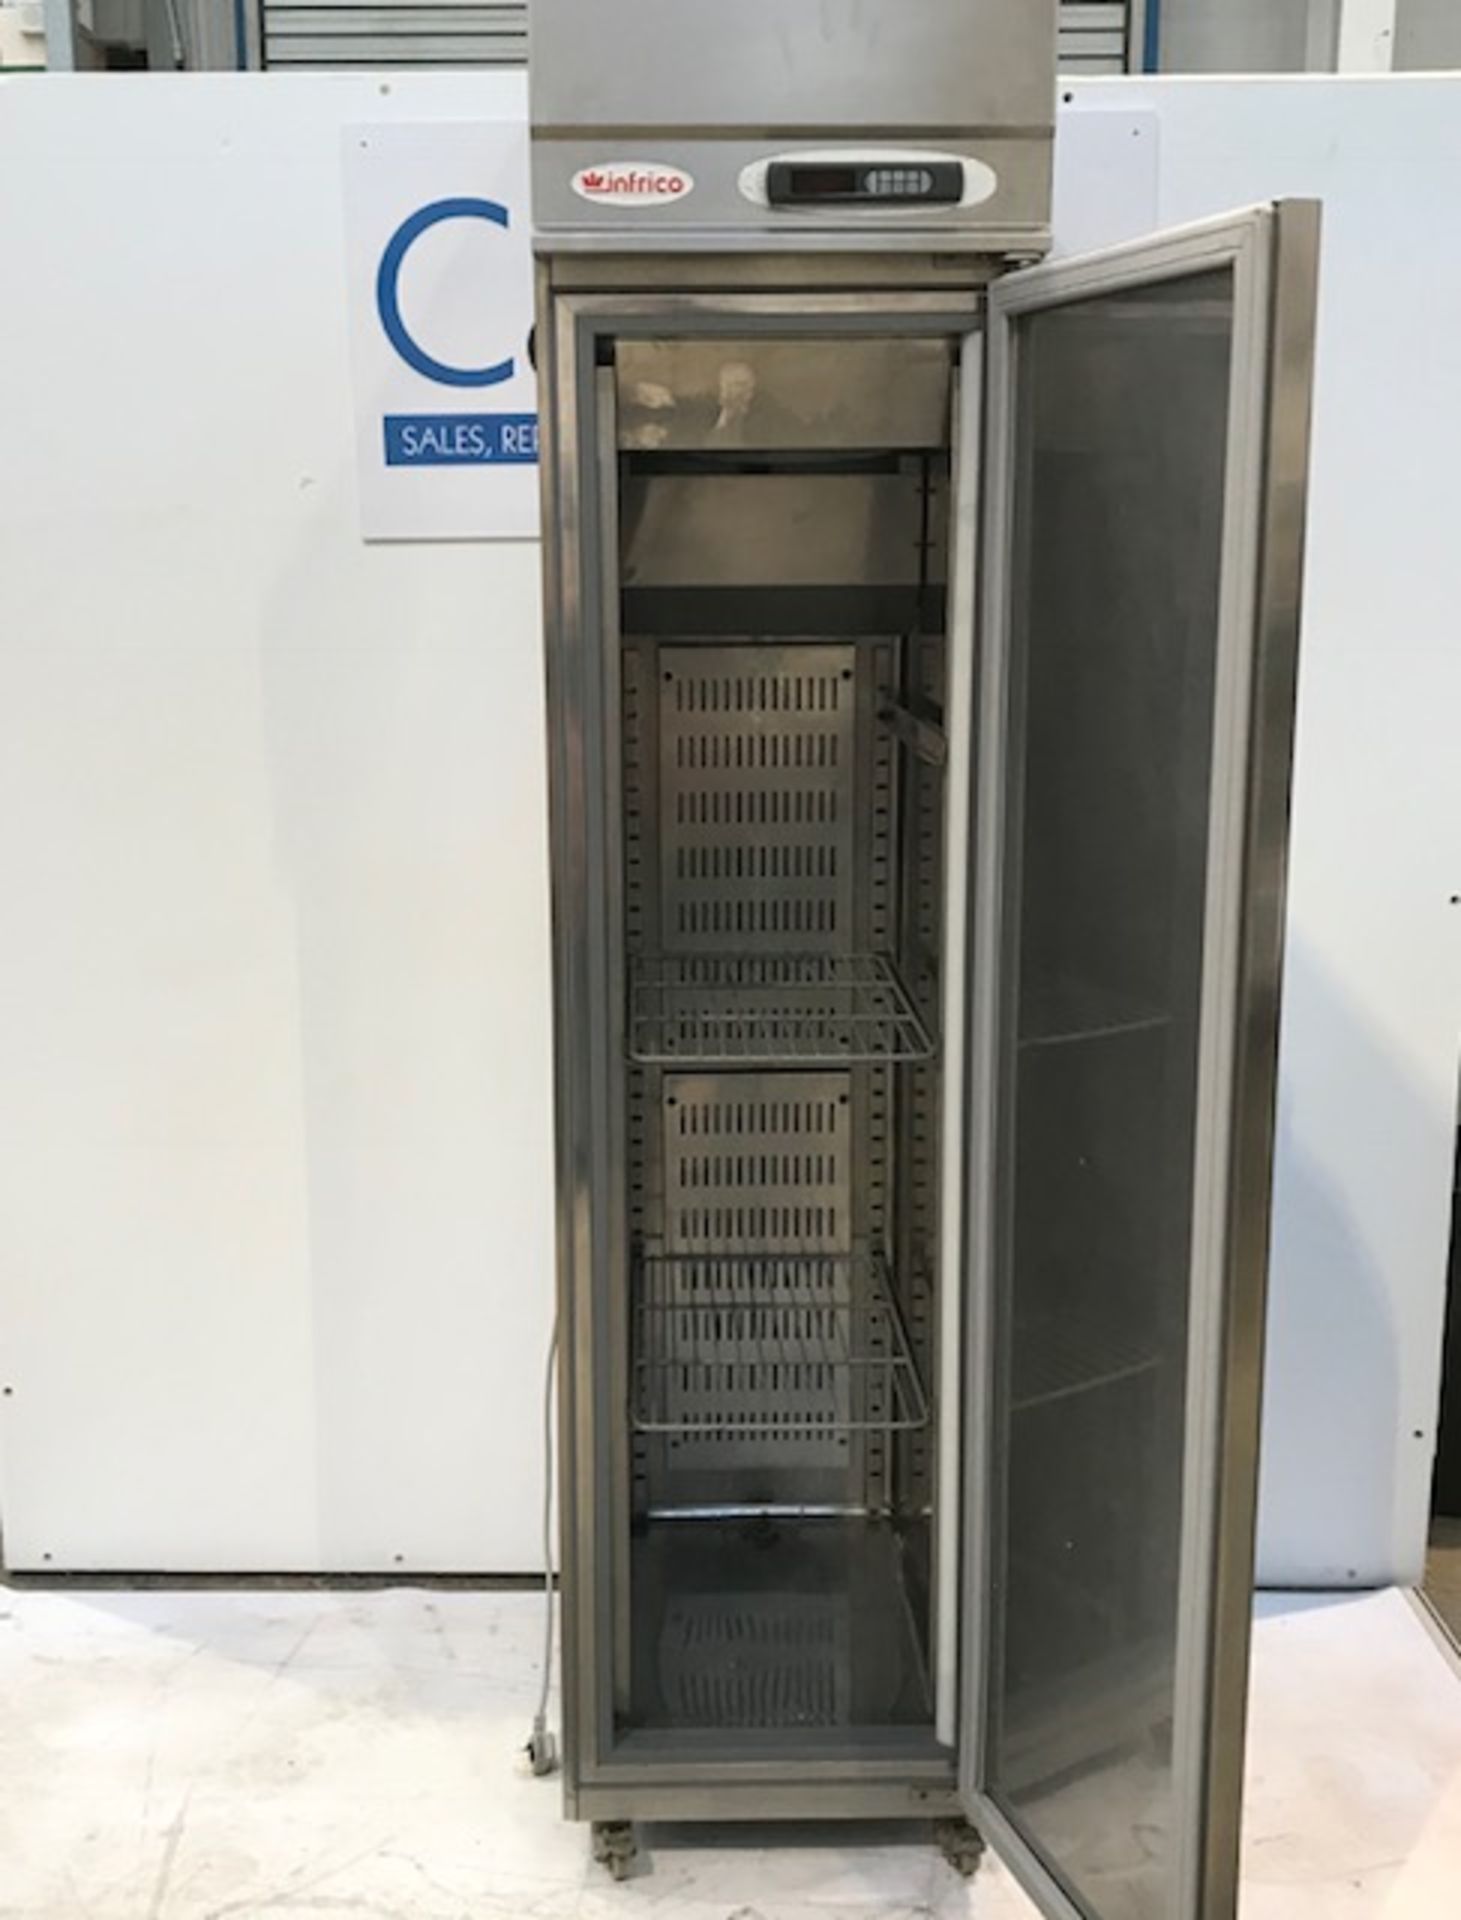 Infrico AGN 301 Single door chiller A sound choice for the cost conscious customer. This Infrico